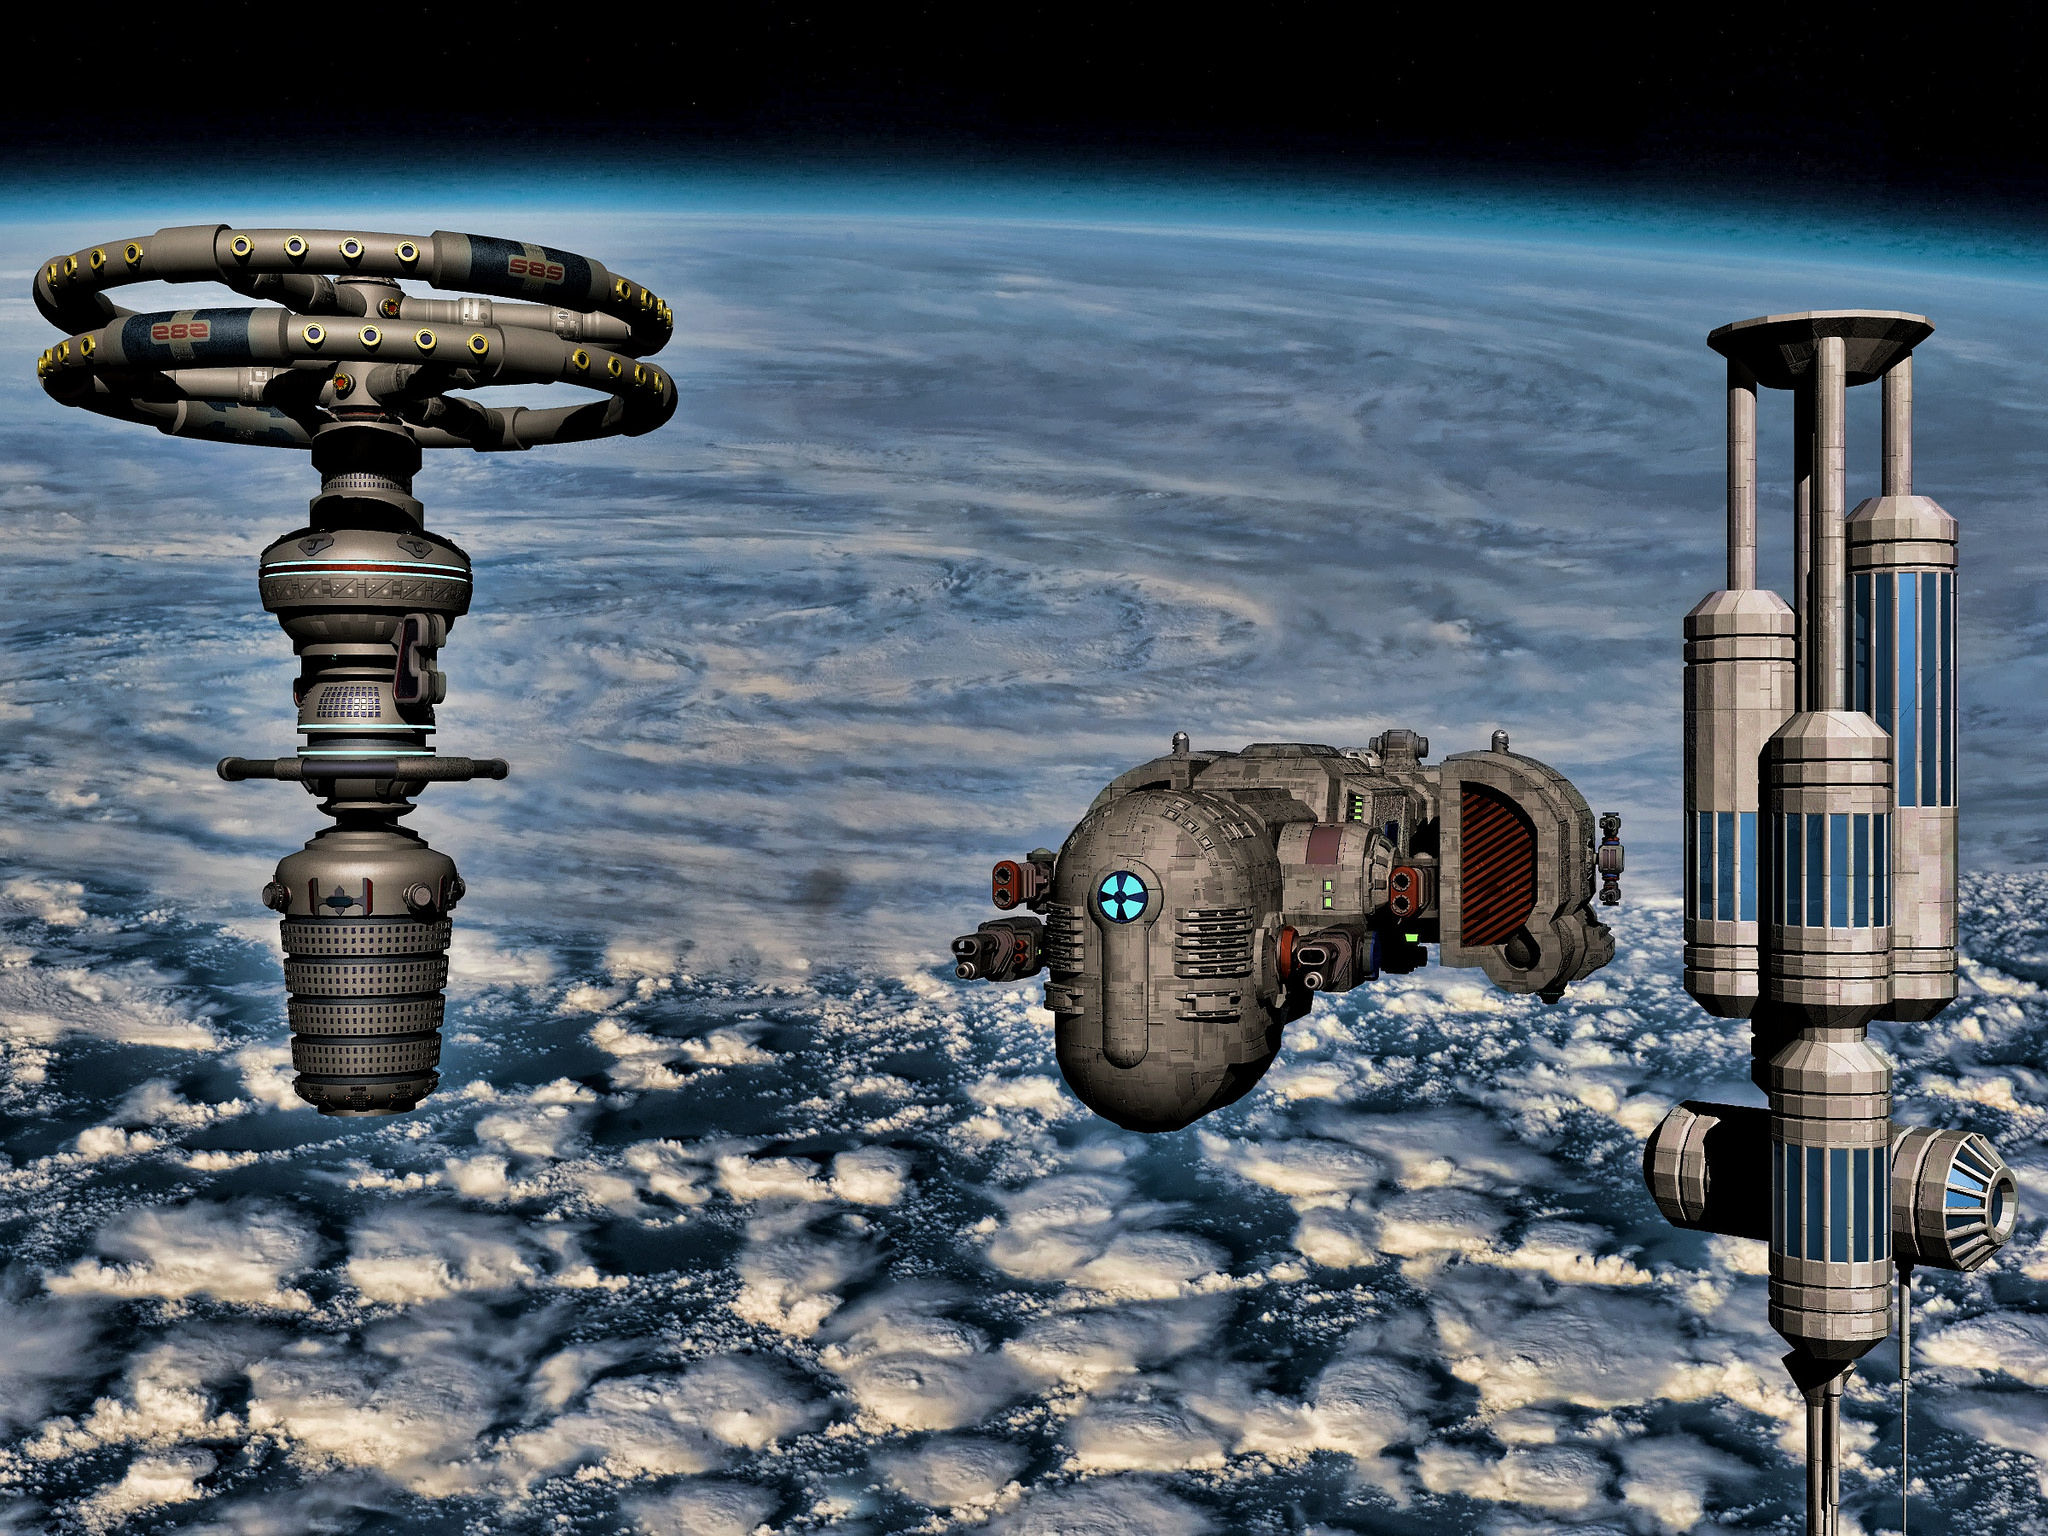 Space stations